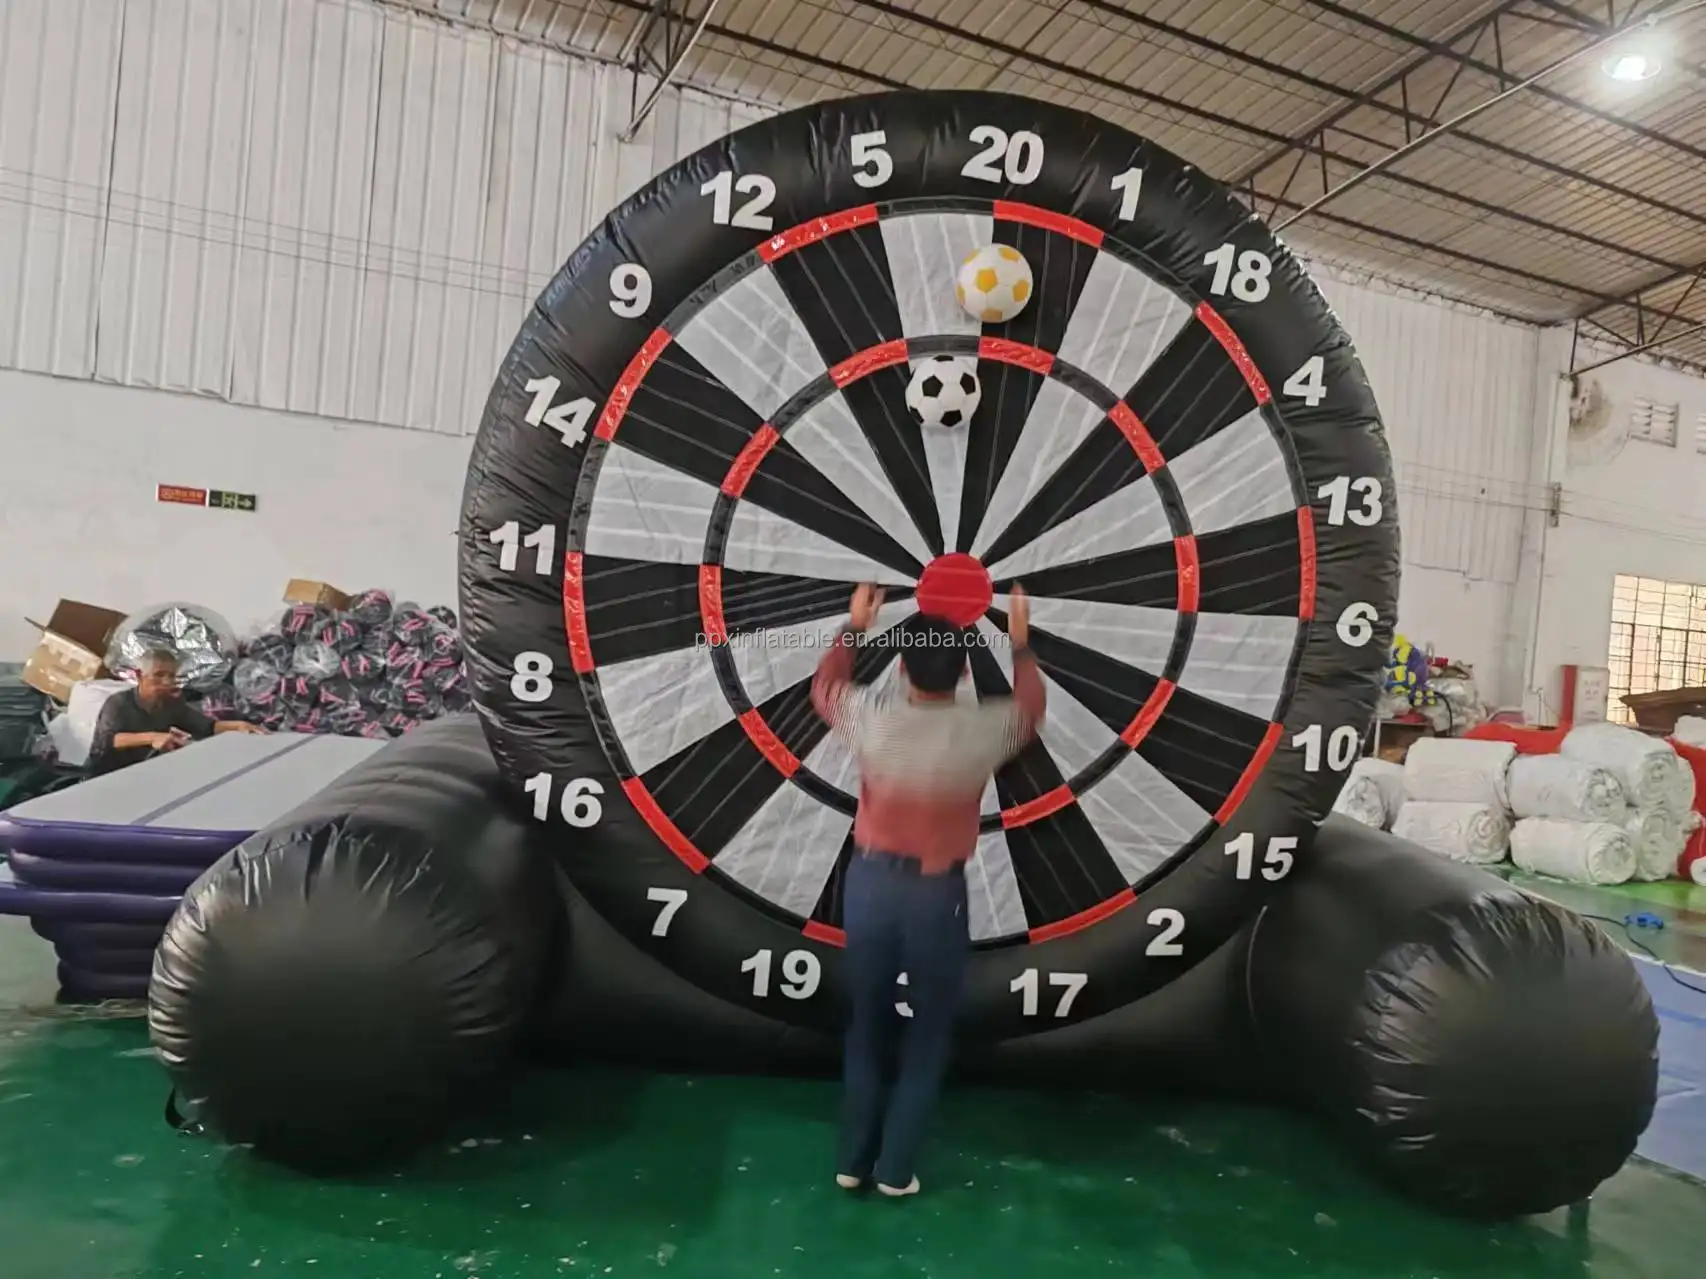 Giant Outdoor Inflatable Football Darts Inflatable Soccer Dart Sports Games For Party inflatable human dart board